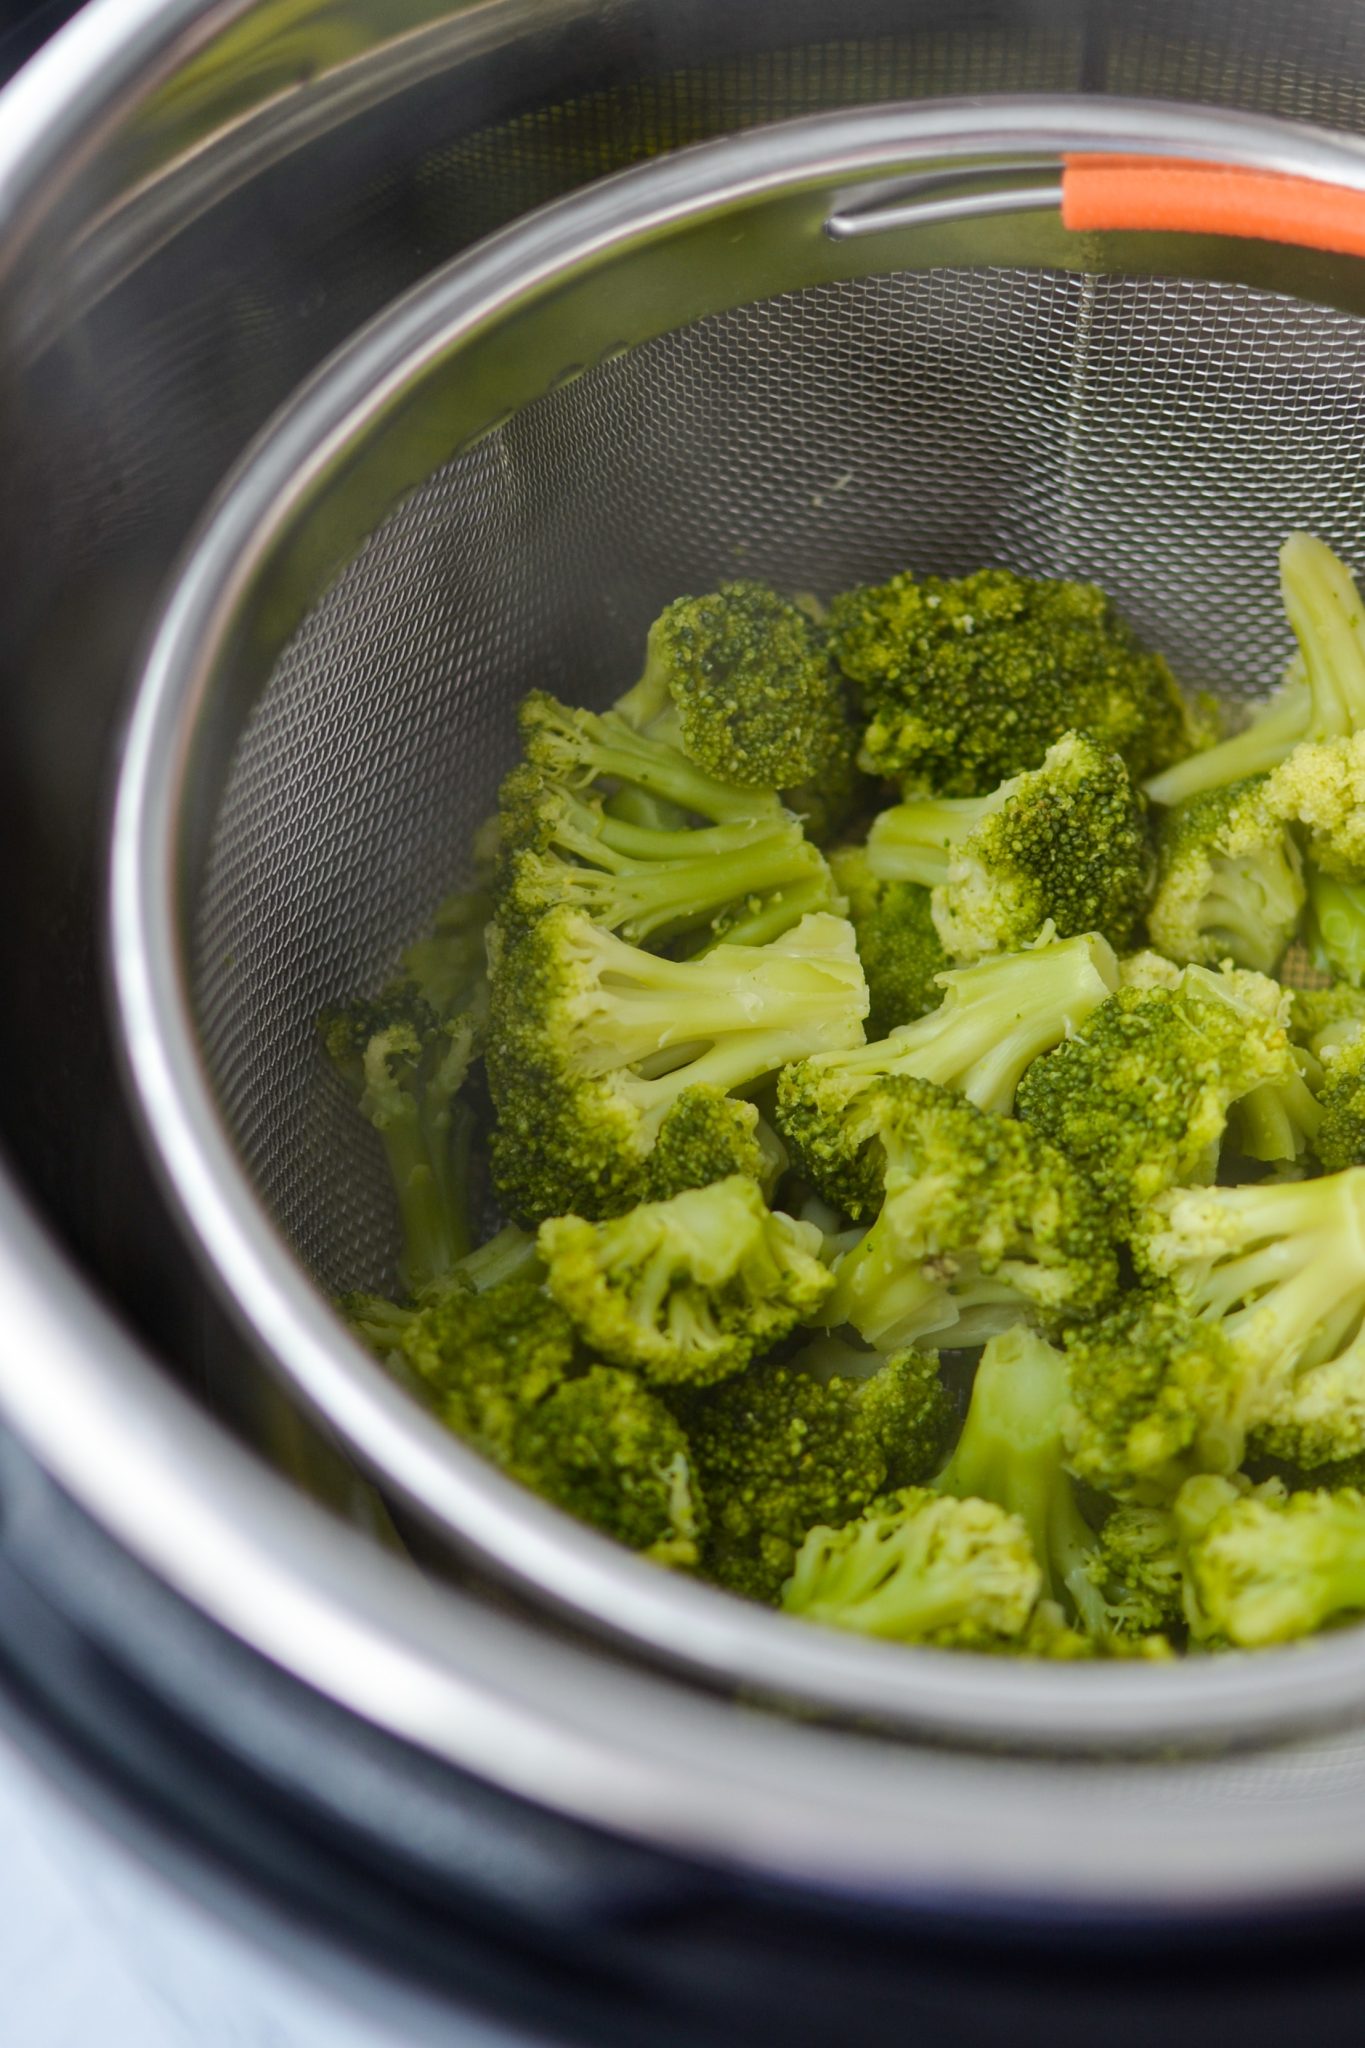 Cooked broccoli inside a steamer basket in the Instant Pot.